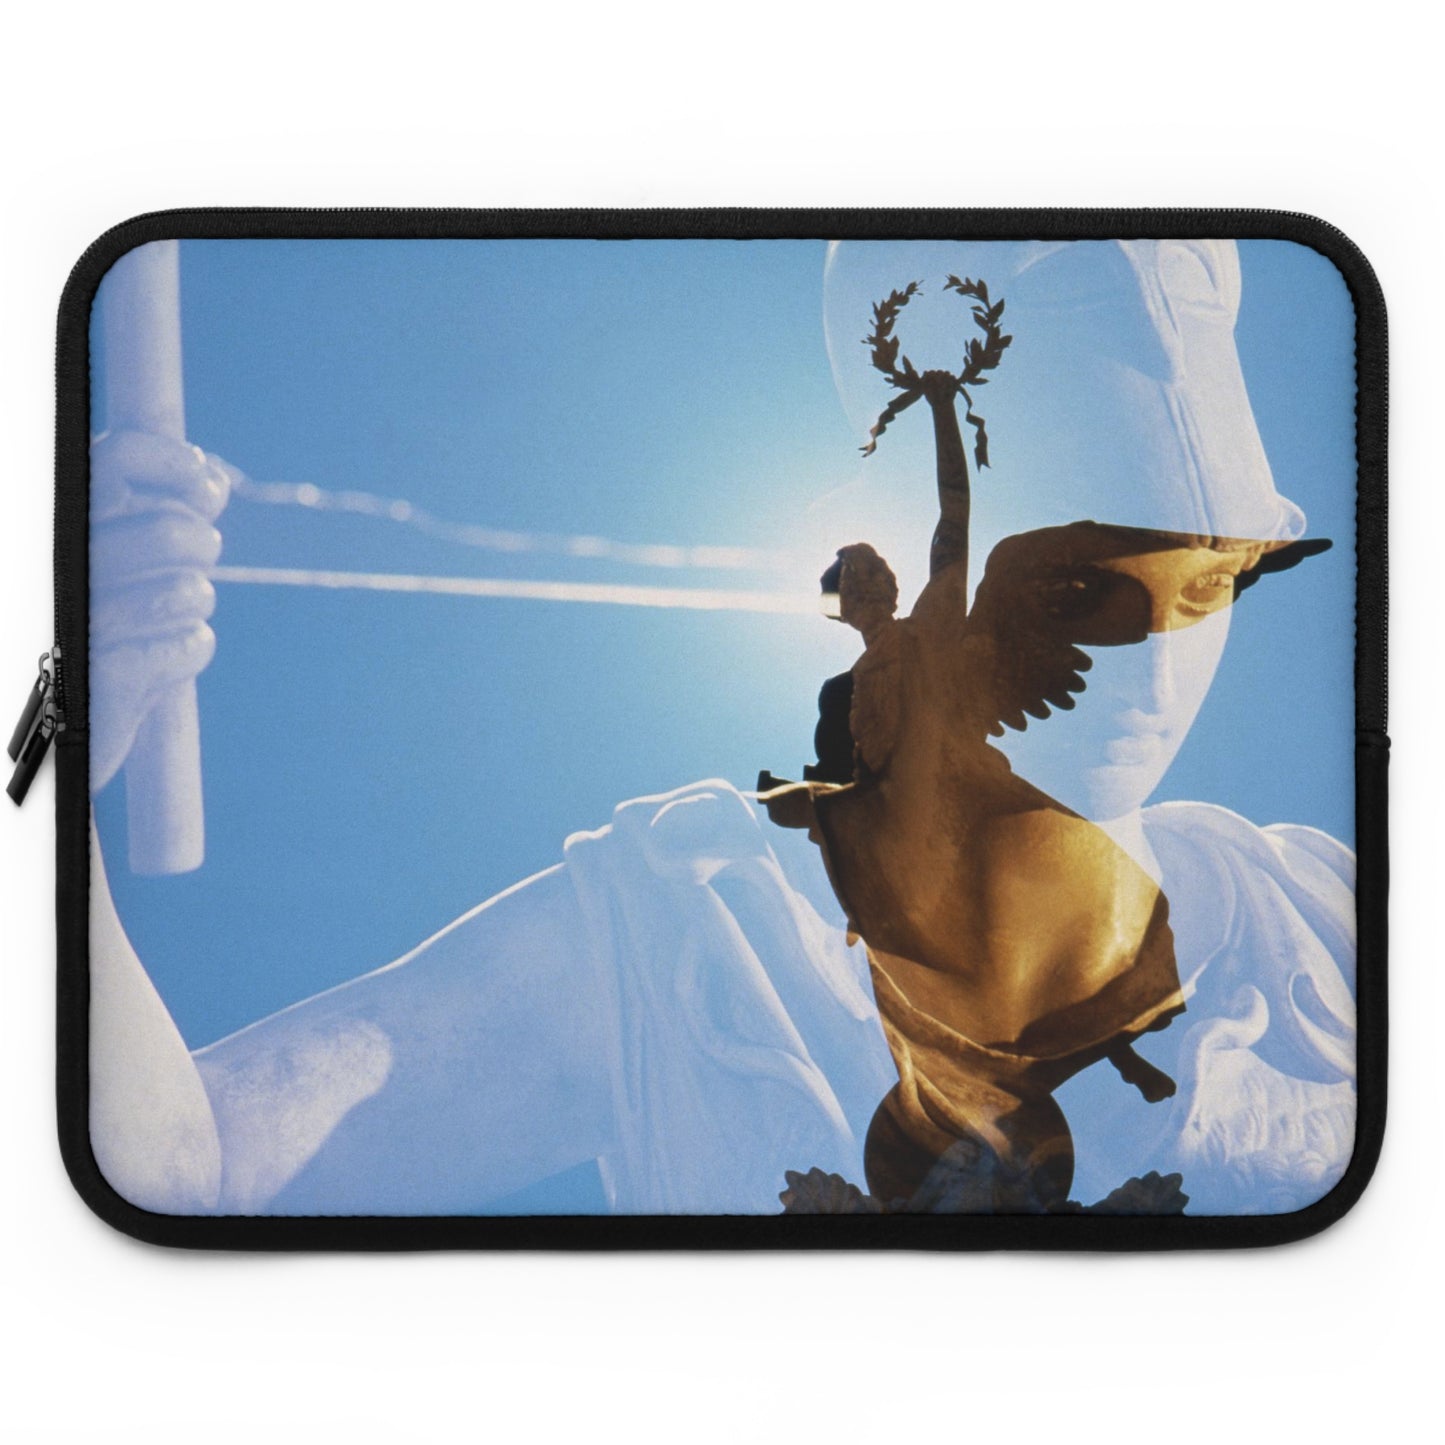 The Victory Laptop Sleeve